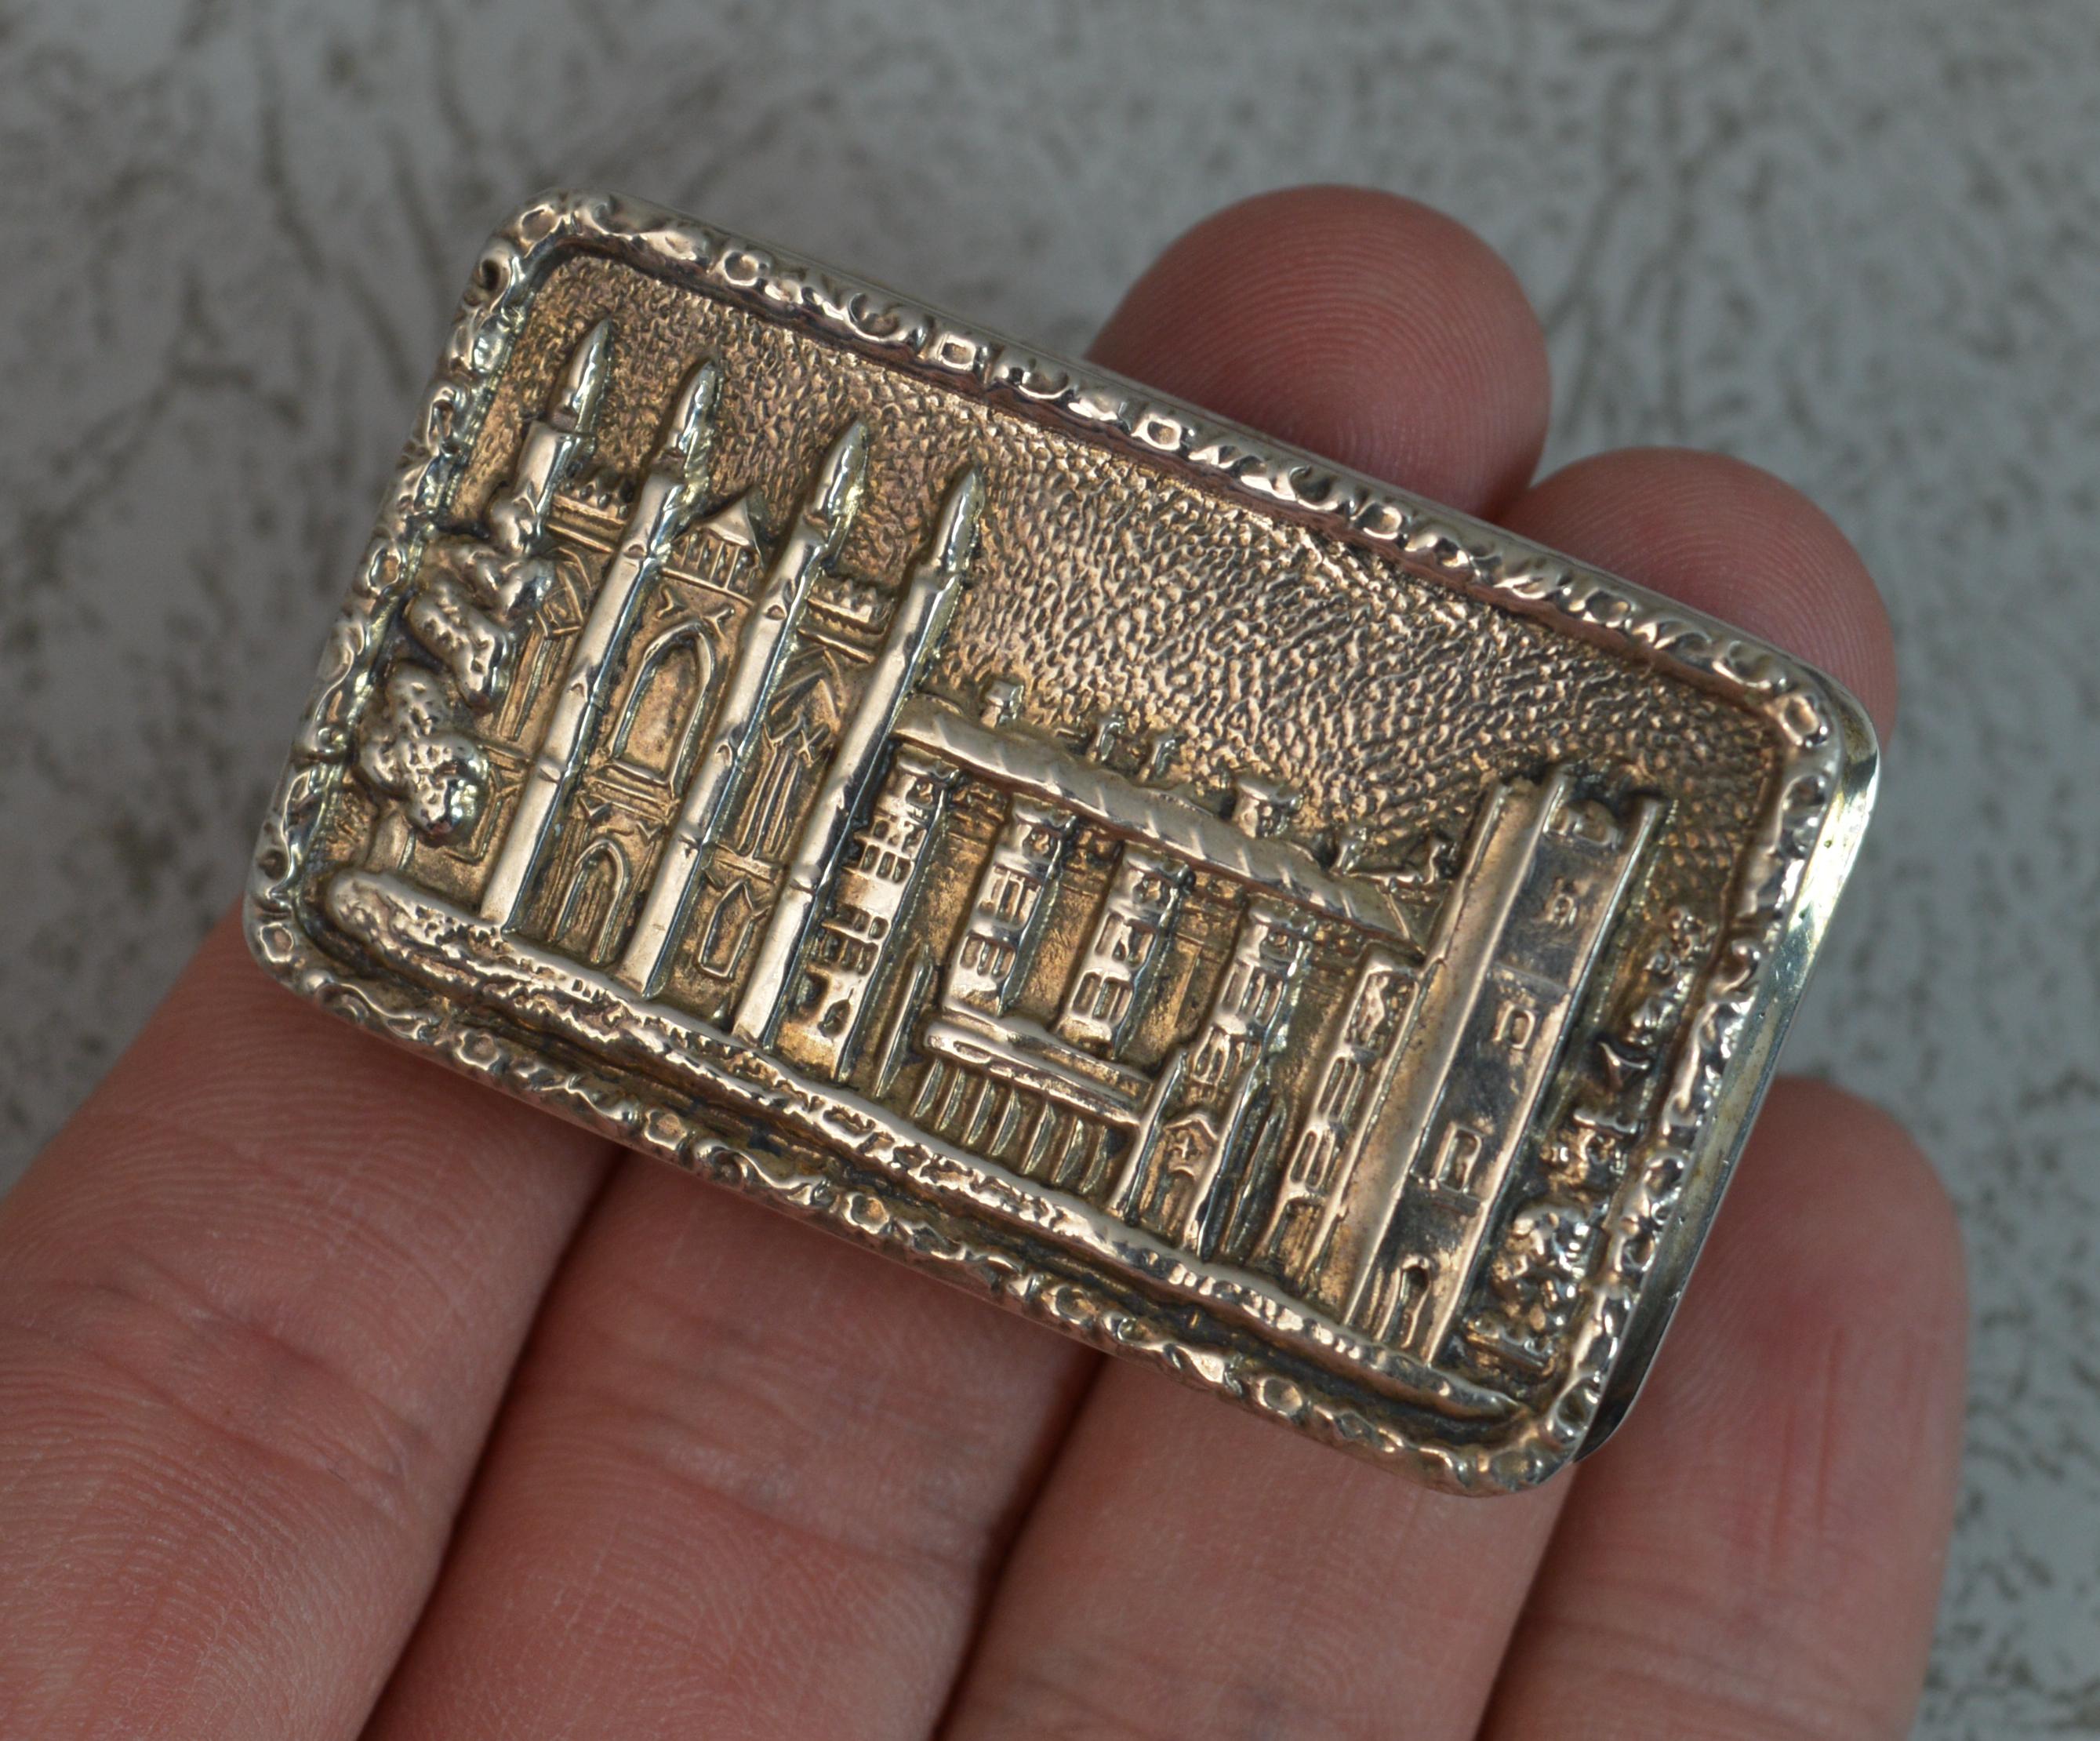 A stylish sterling silver pill or snuff box.
Castle Top design.
Well made, tactile, vintage example.

Hallmarks ; full hallmarks inside
Size ; 47mm x 29mm x 12mm approx
Weight ; 46.5 grams
Condition ; Excellent for age. Crisp pattern and hallmarks.